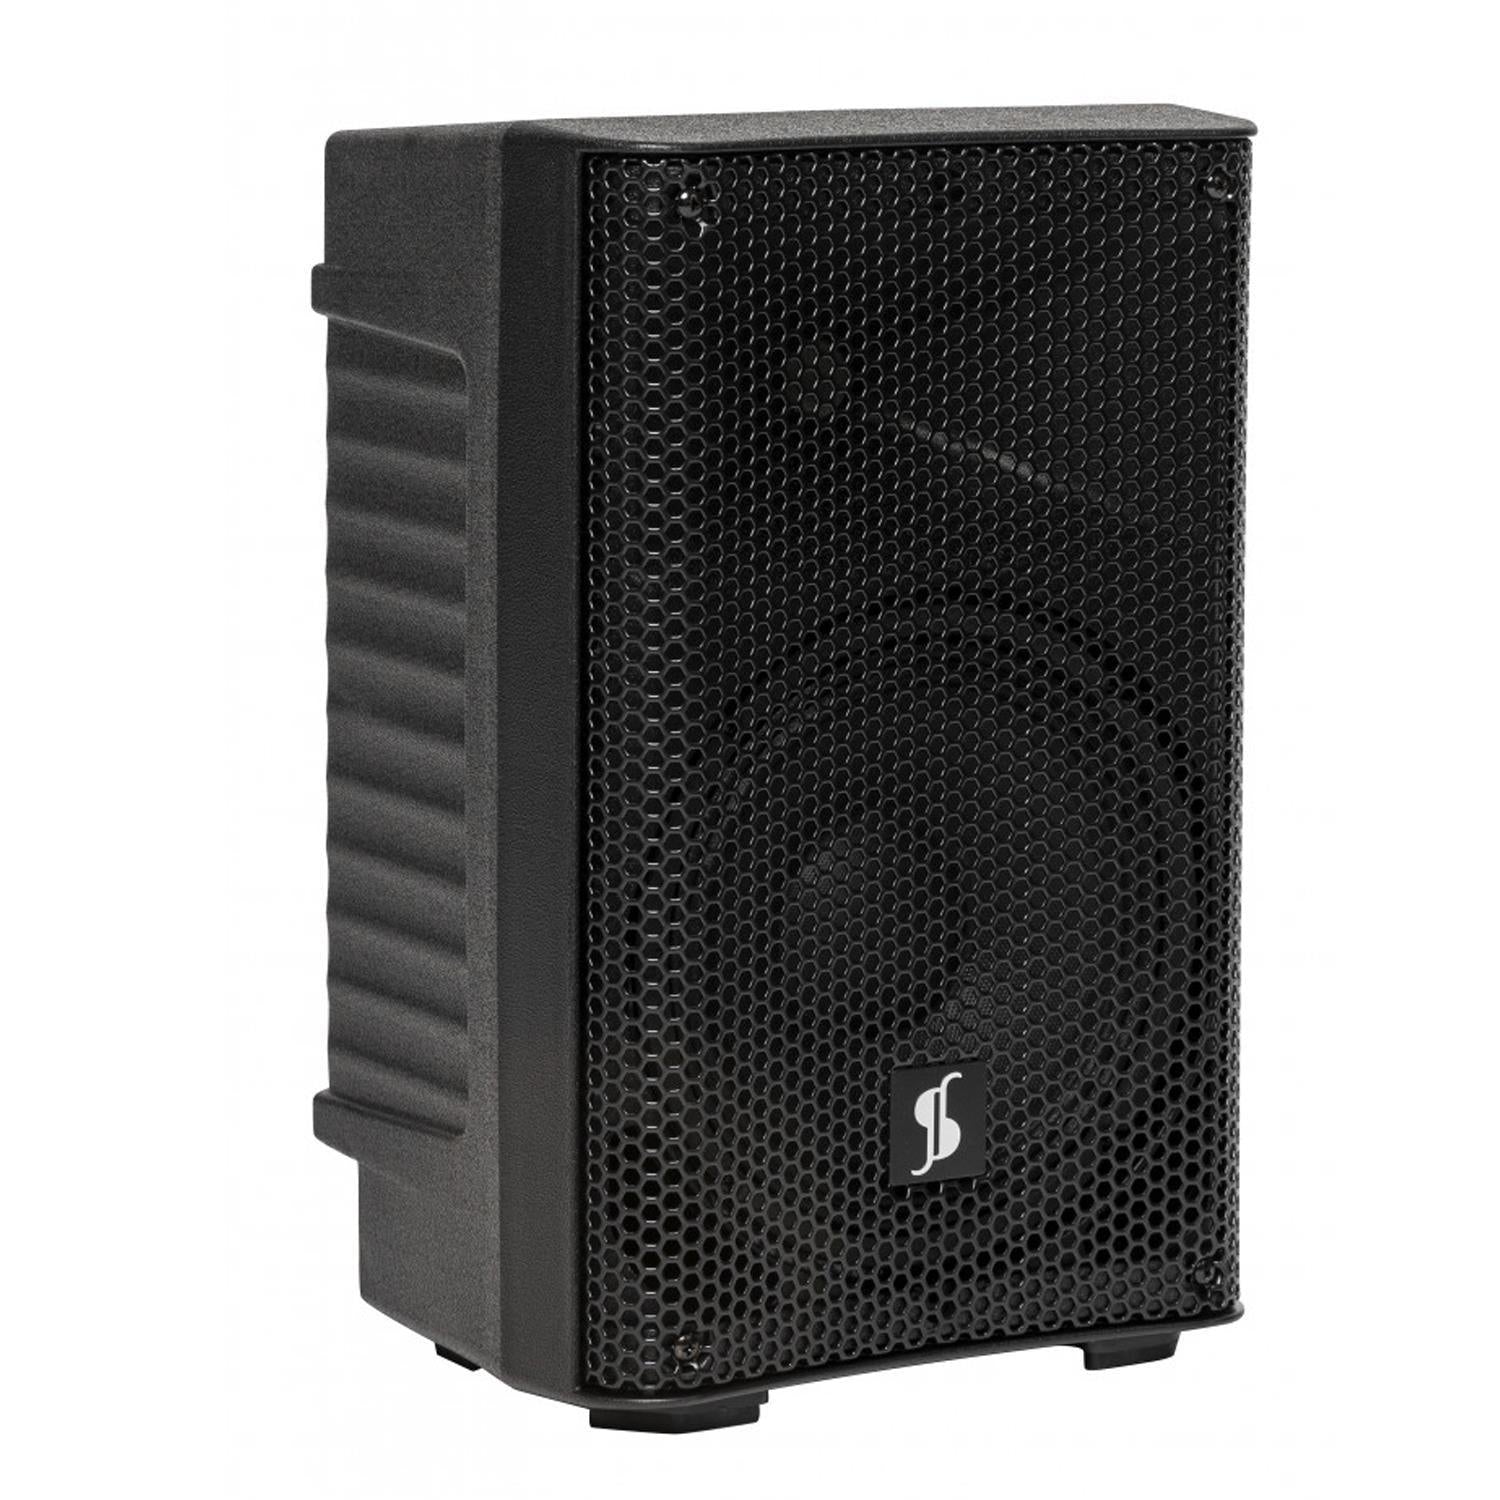 Stagg AS8 8" 250w Battery Powered Active Speaker with Bluetooth - DY Pro Audio